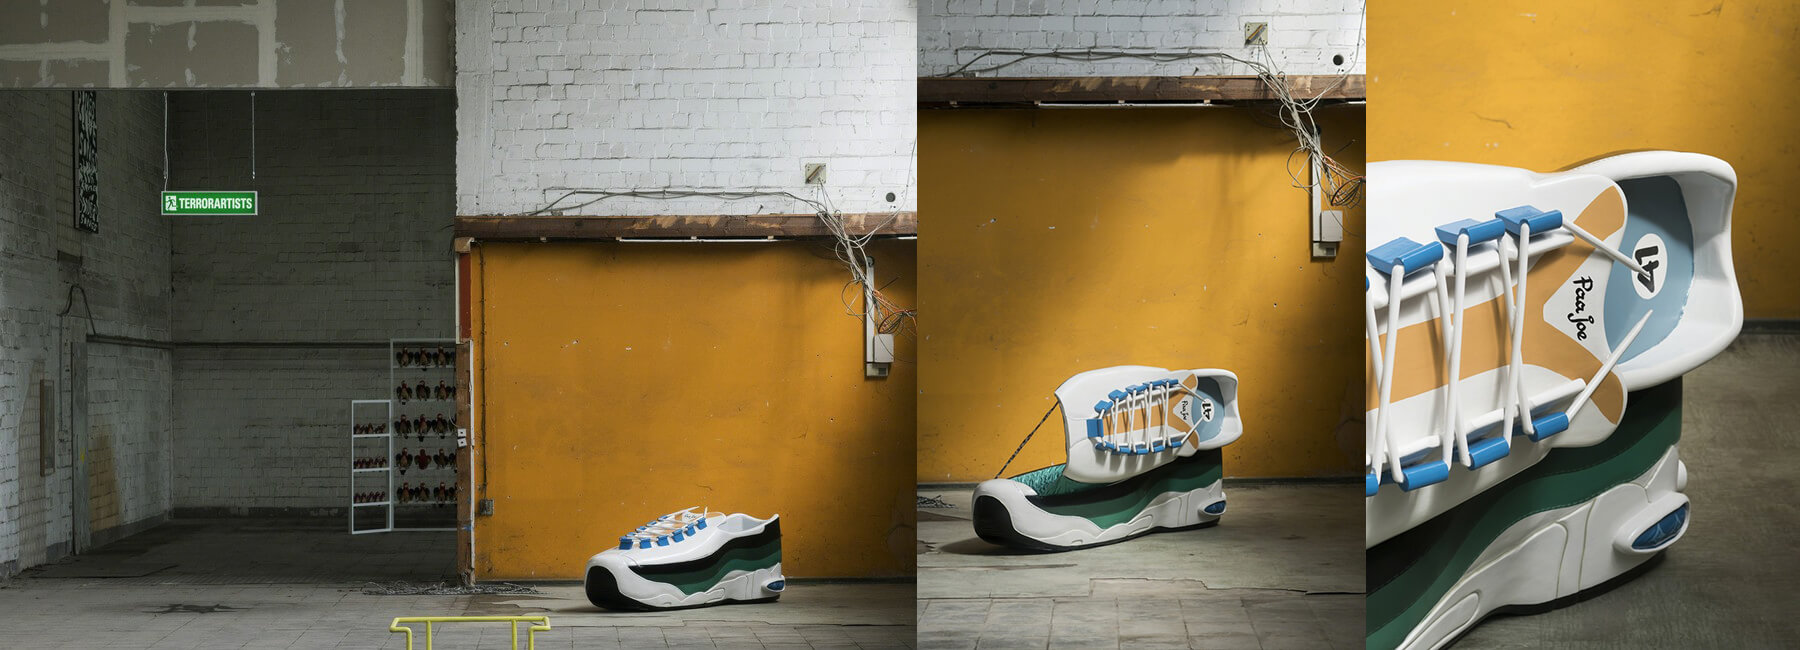 Design urns and coffins: Coffin in the Form of a Nike Sneaker _close-up collage